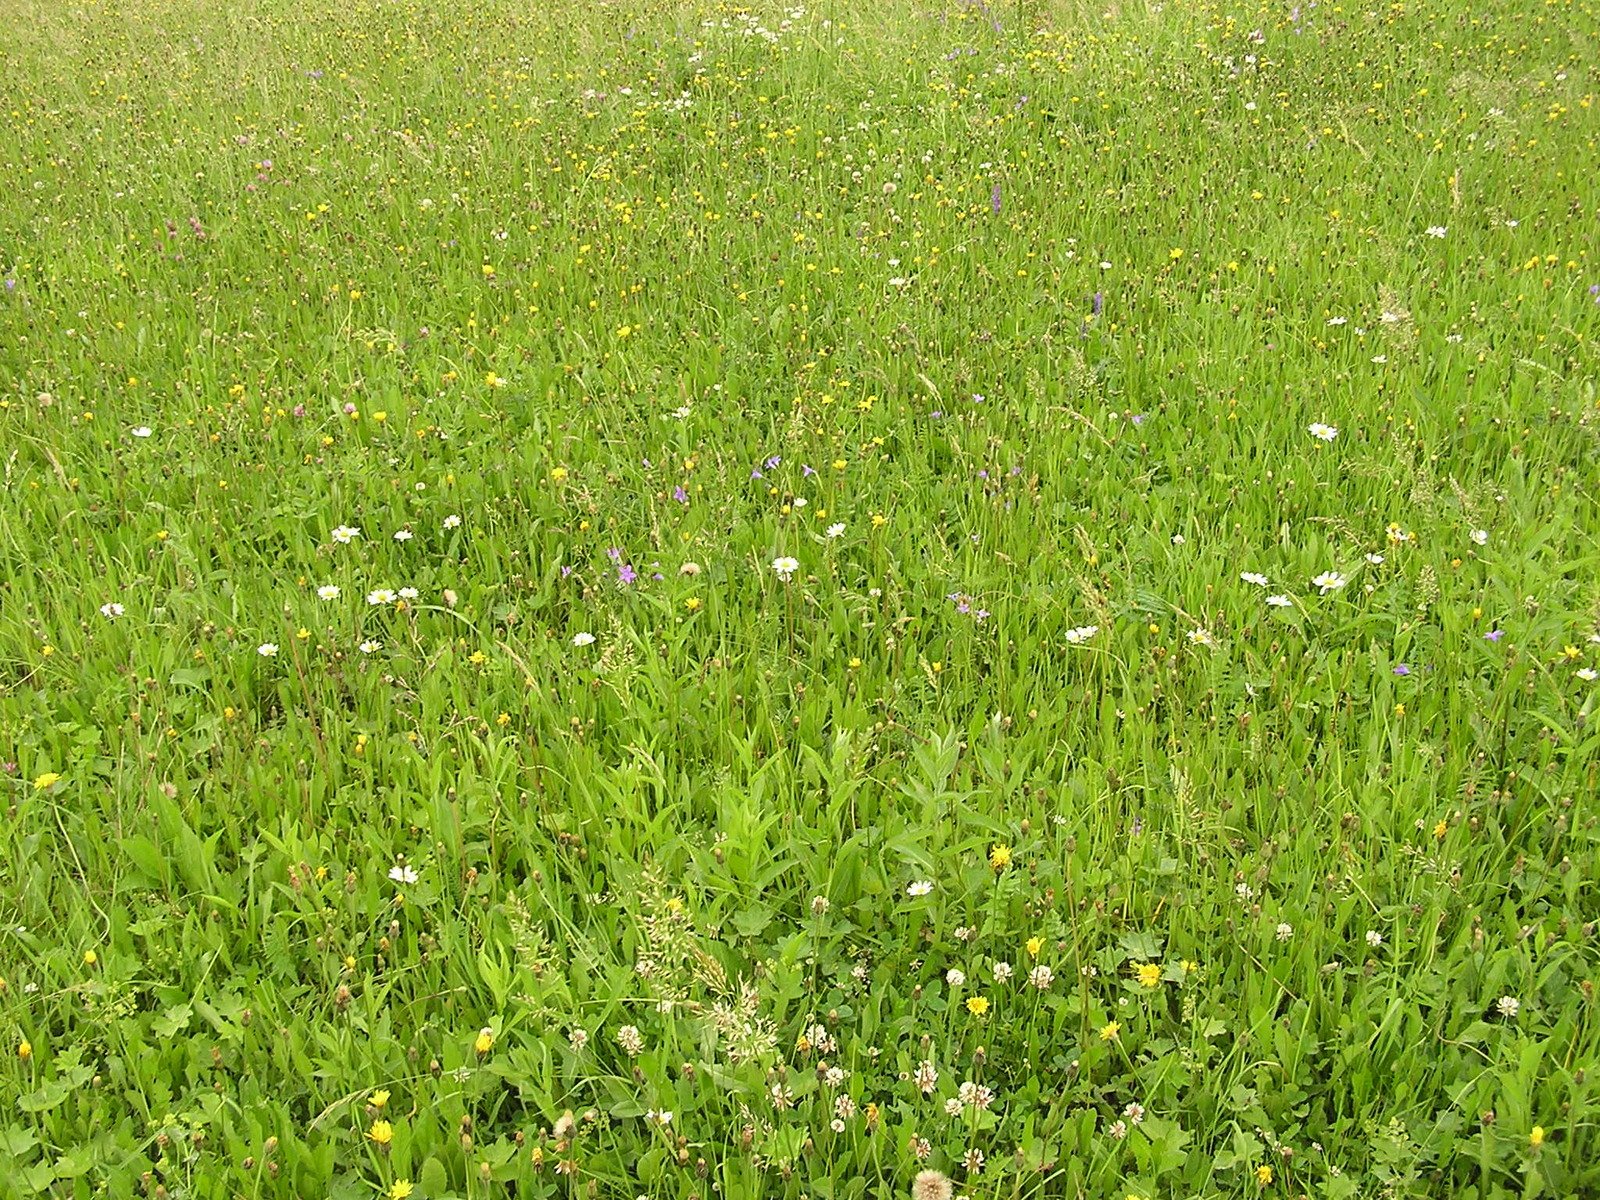 a grassy field that is covered in small white flowers